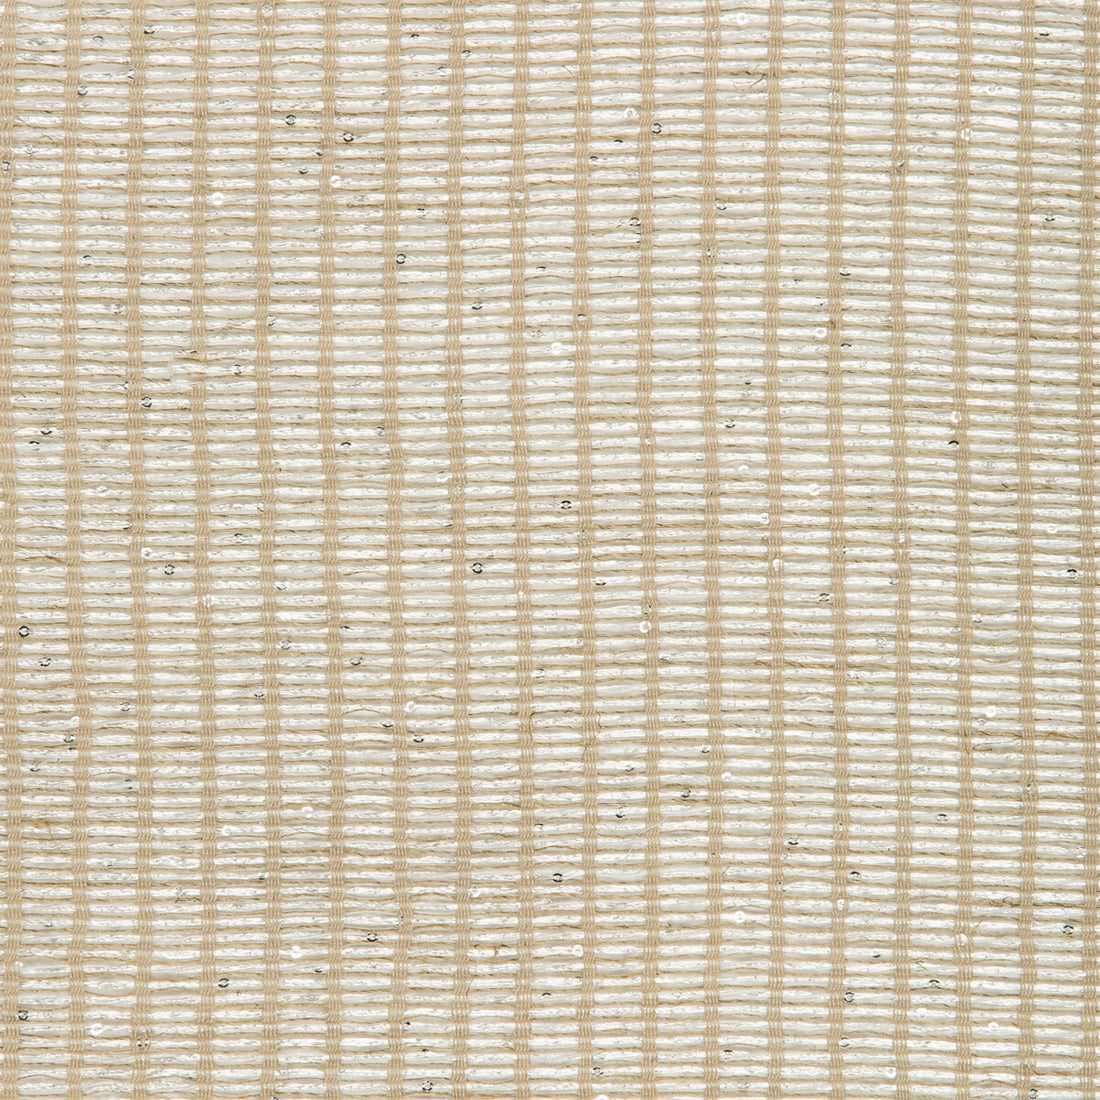 Leno Shine fabric in linen/silver color - pattern 4620.16.0 - by Kravet Couture in the Izu Collection collection